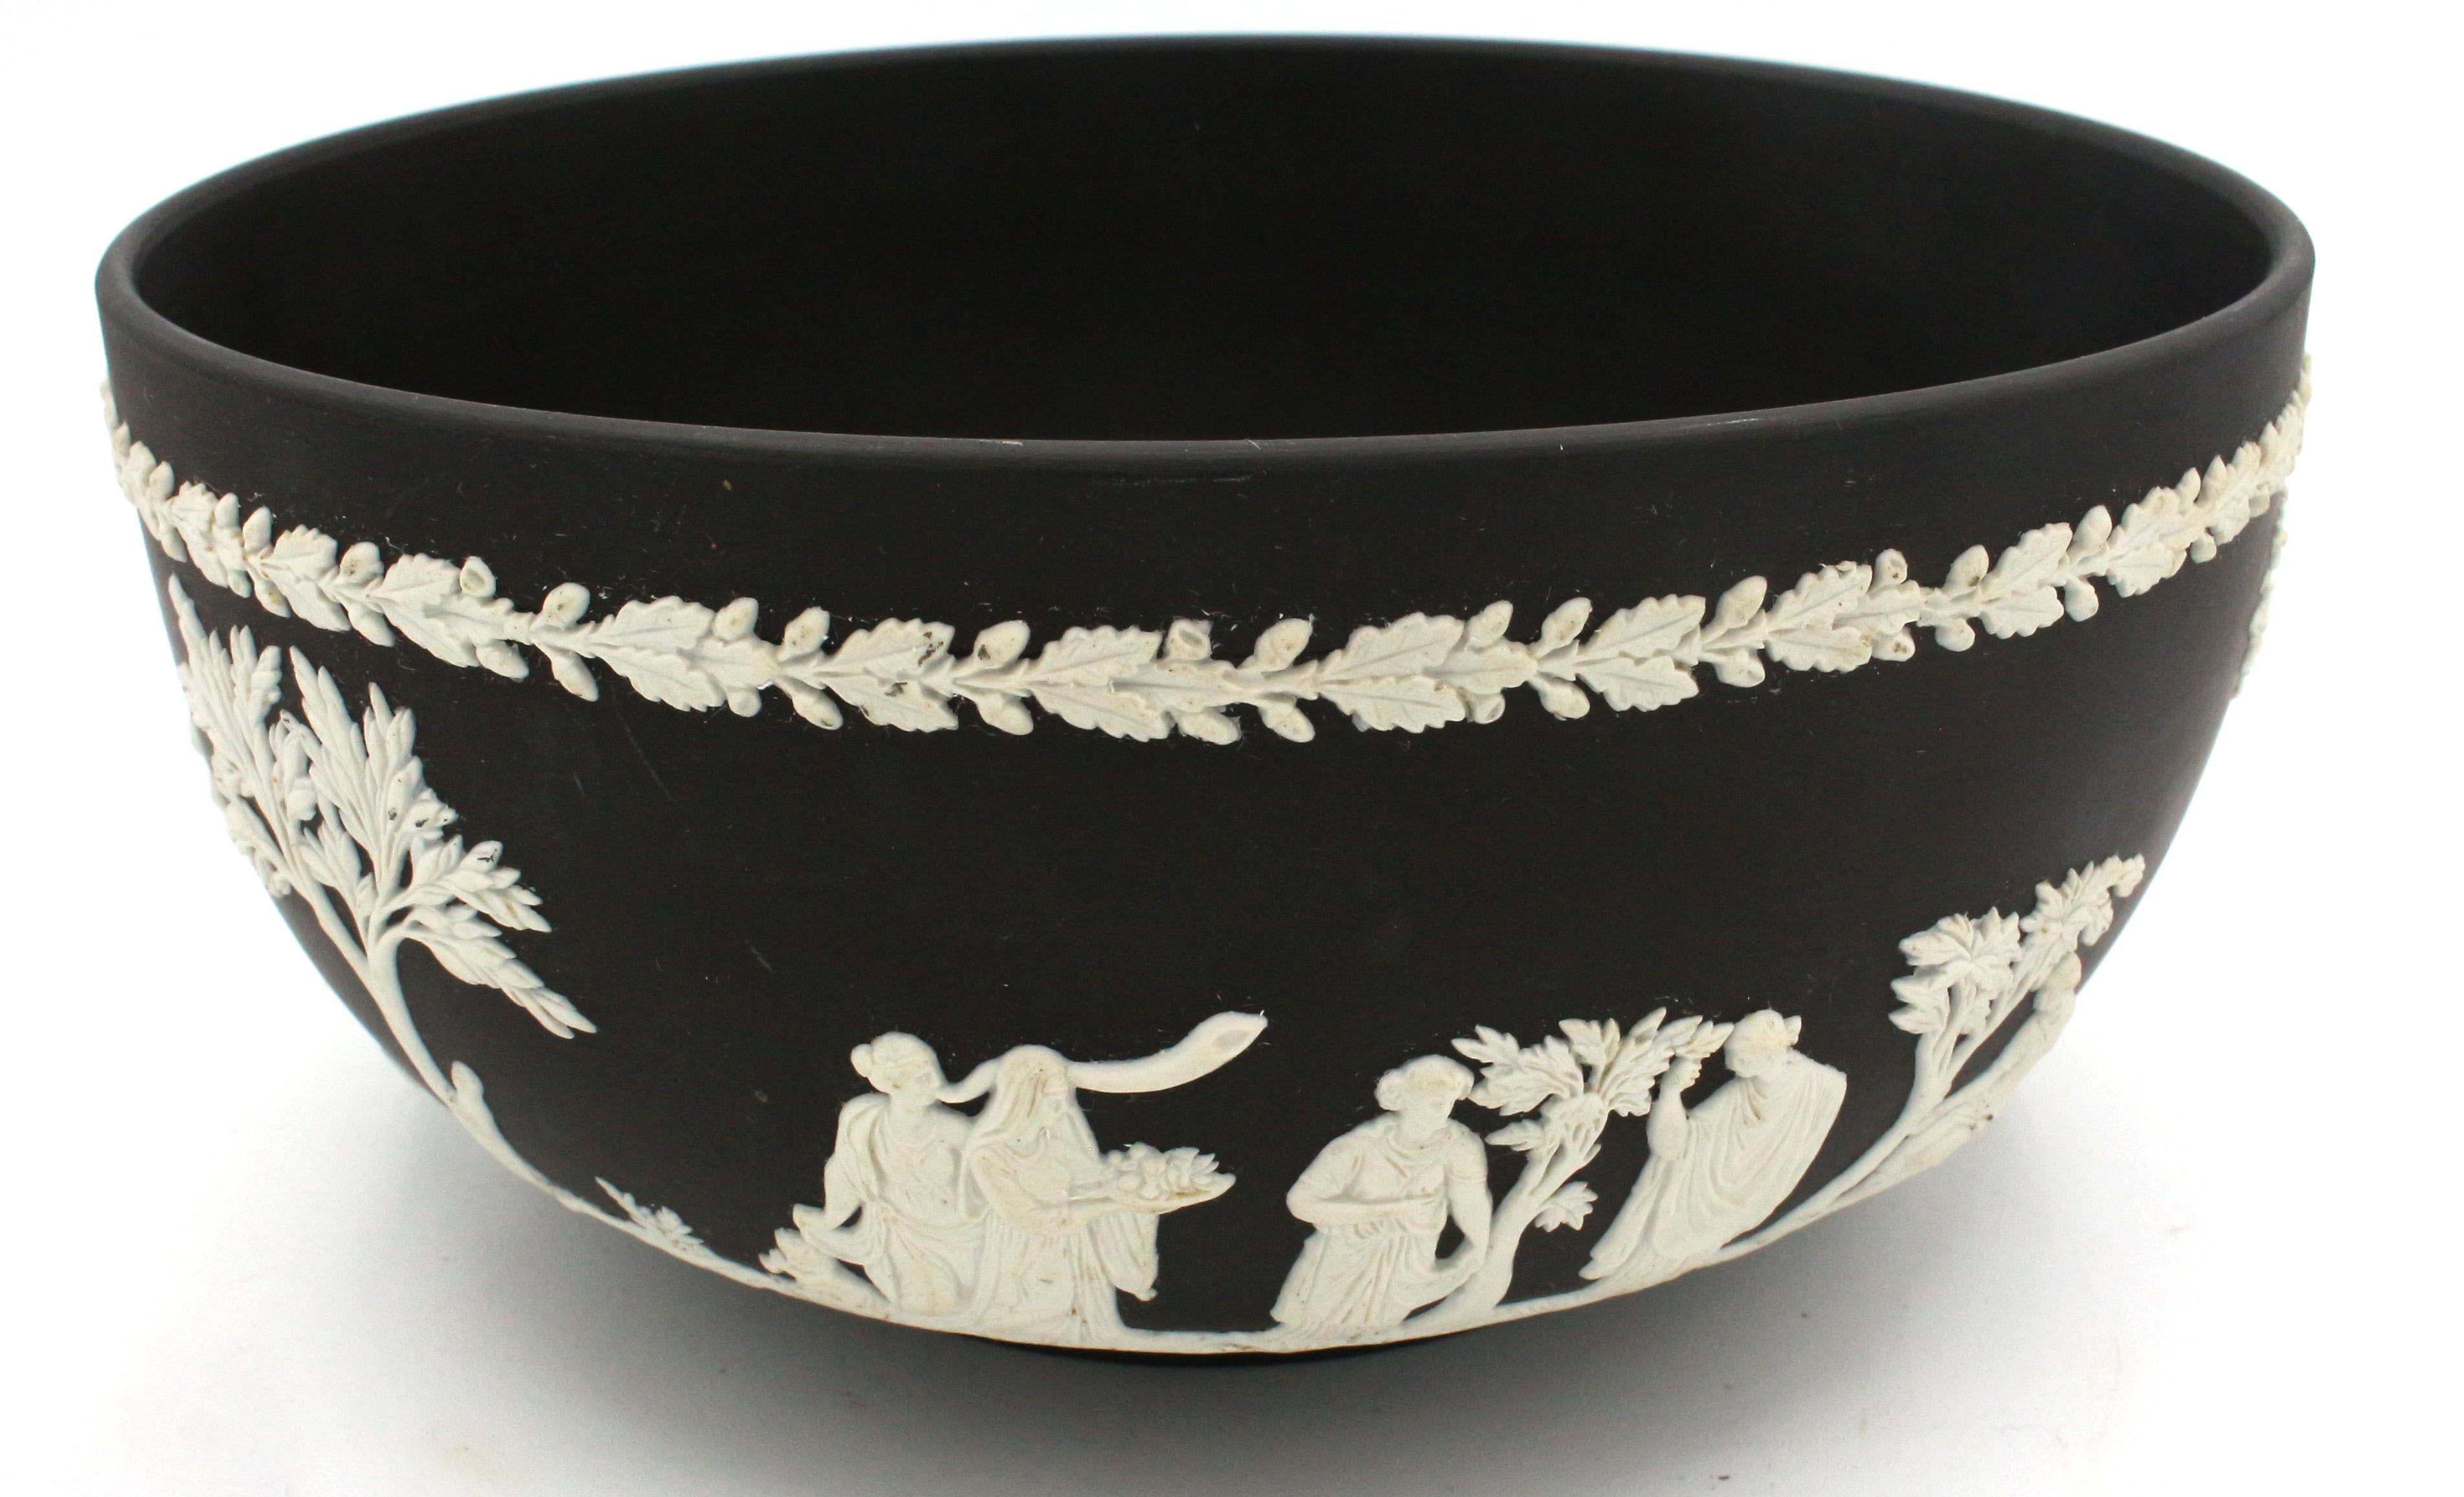 Wedgwood basalt fruit bowl, mid-20th century. Surrounded by applied Greco-Roman figures with tributes of fruits & flowers. Marked Made in England, Wedgwood, K864.
7 5/8